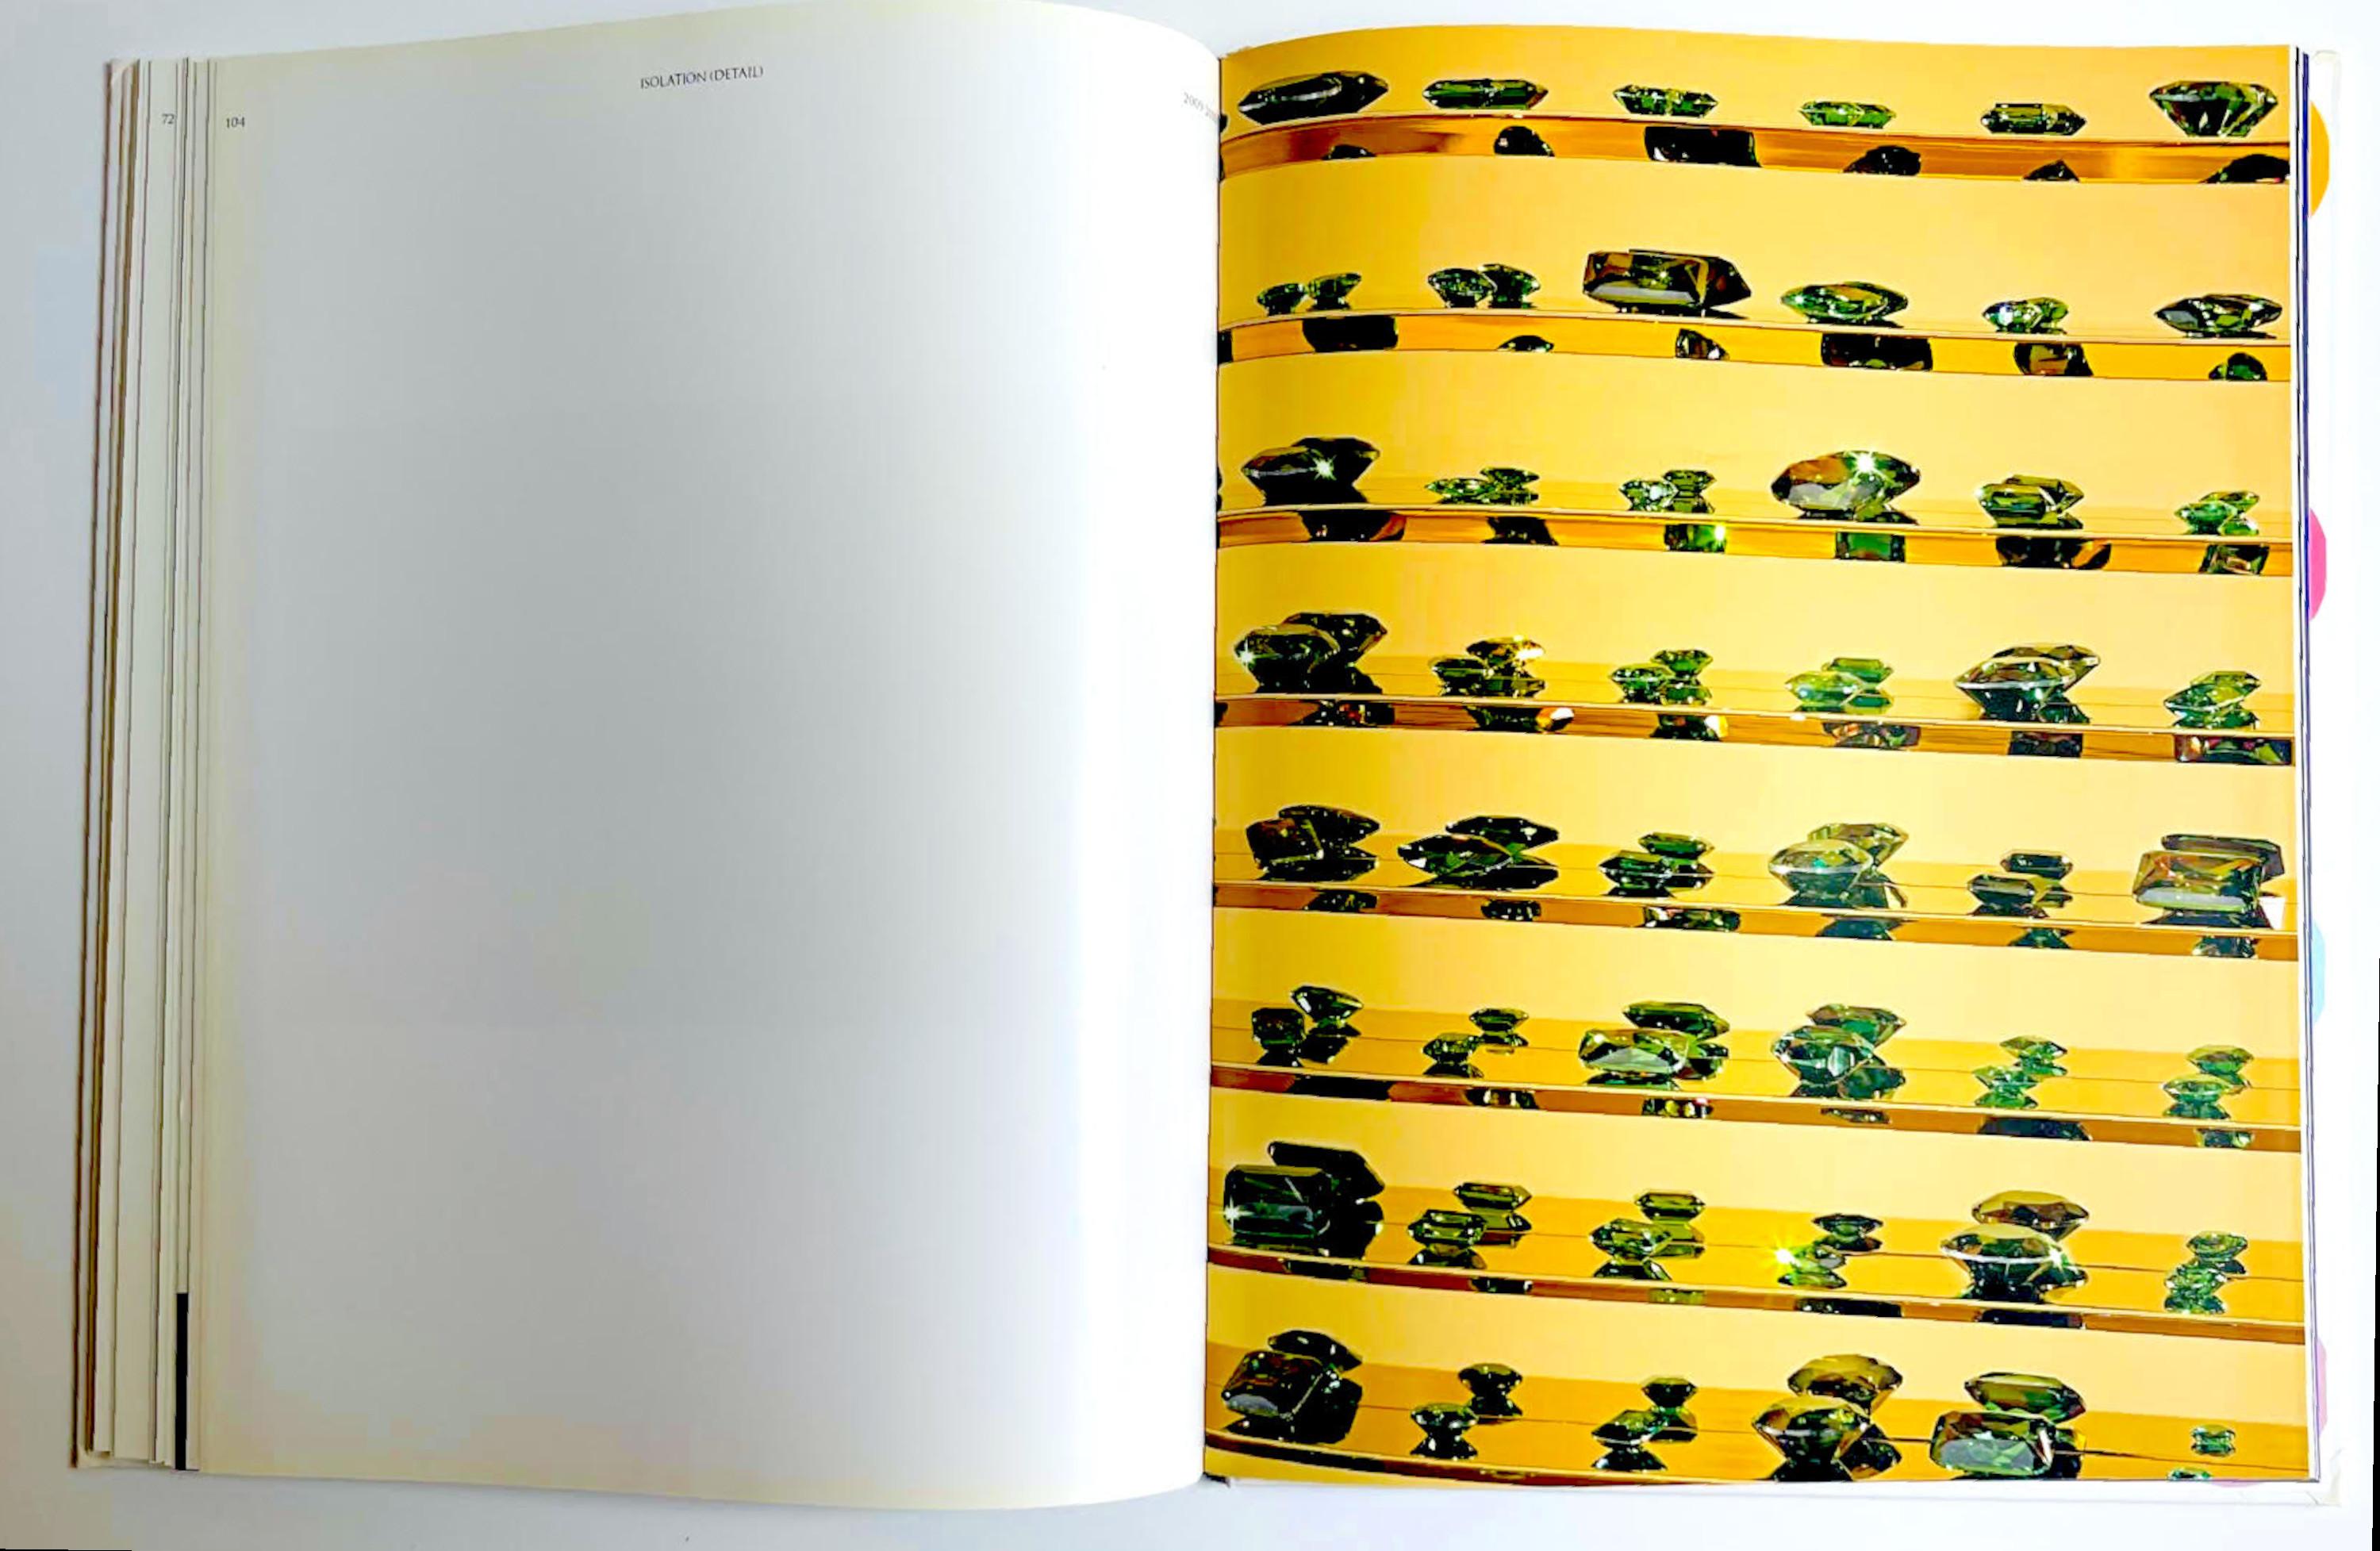 Cornucopia (limited edition hardback monograph hand signed by Damien Hirst) For Sale 19